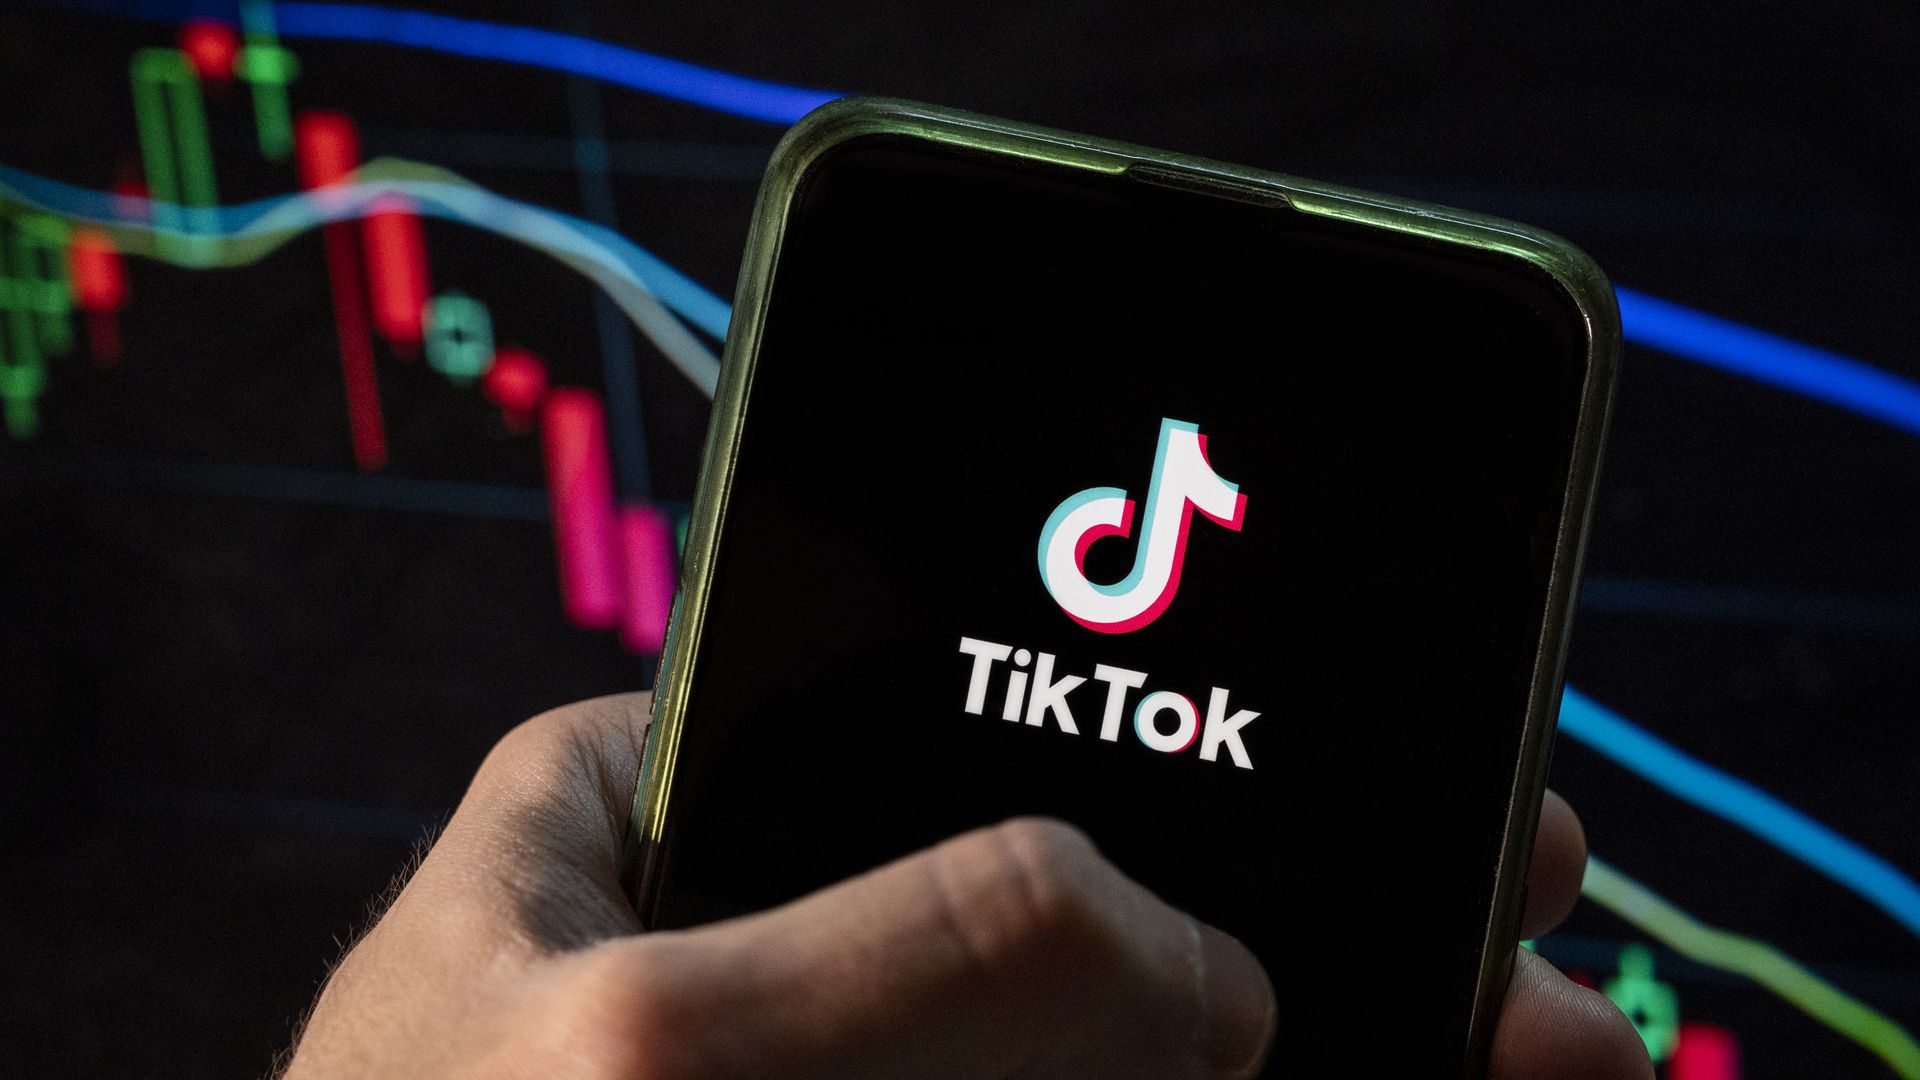 TikTok image on a mobile phone being held 